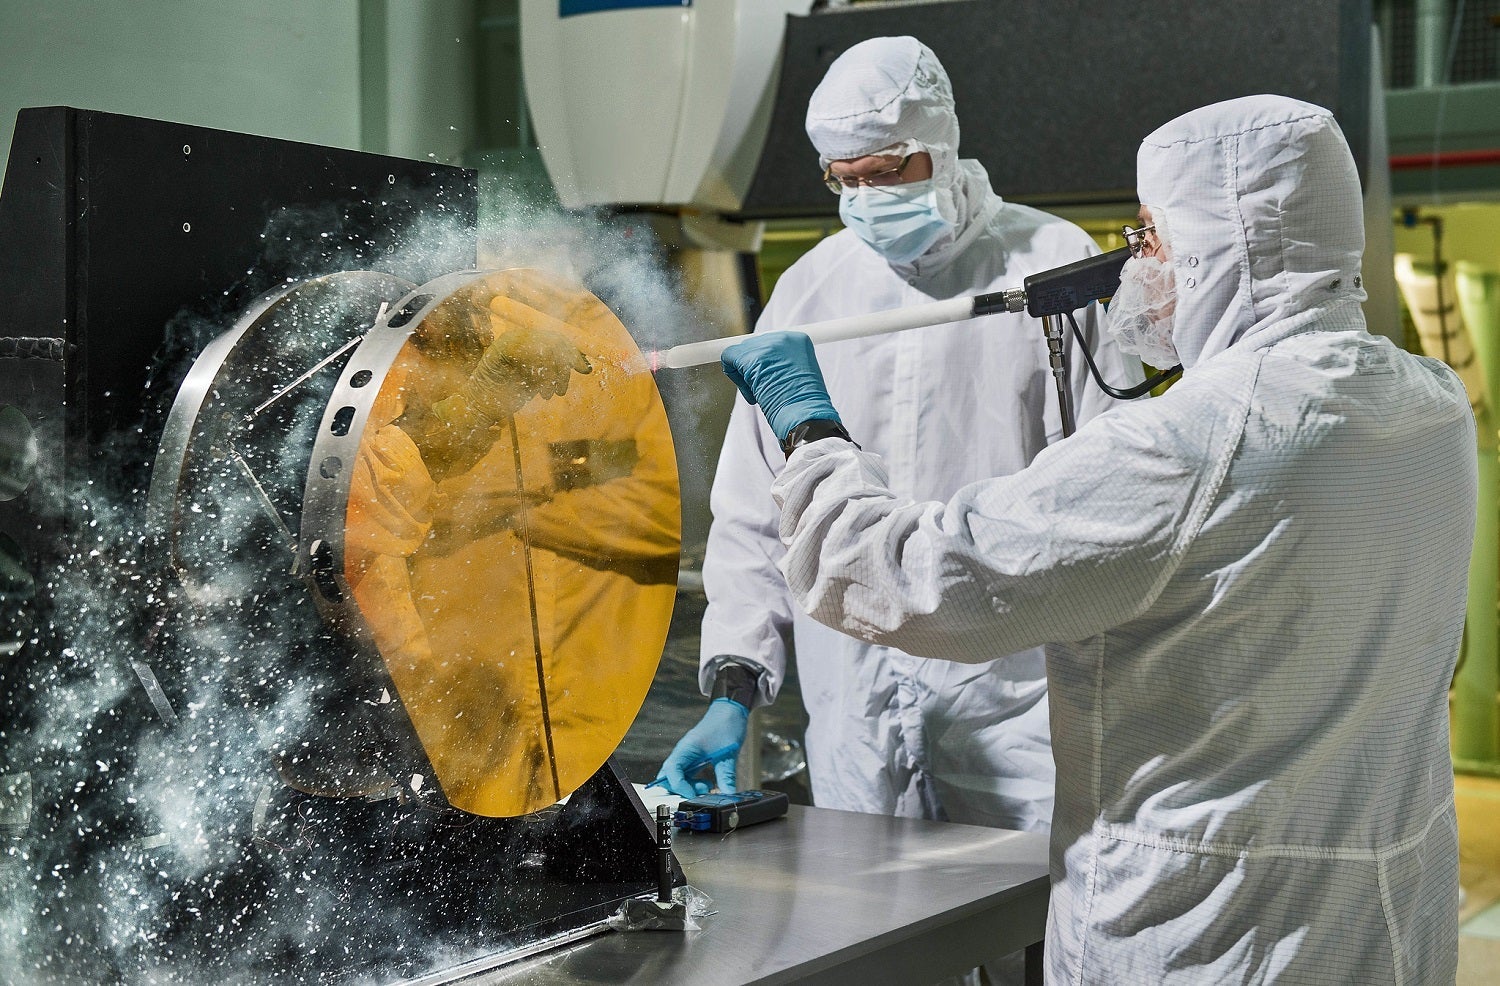 Just like drivers sometimes use snow to clean their car mirrors in winter, two Exelis Inc. engineers are practicing “snow cleaning'” on a test telescope mirror.